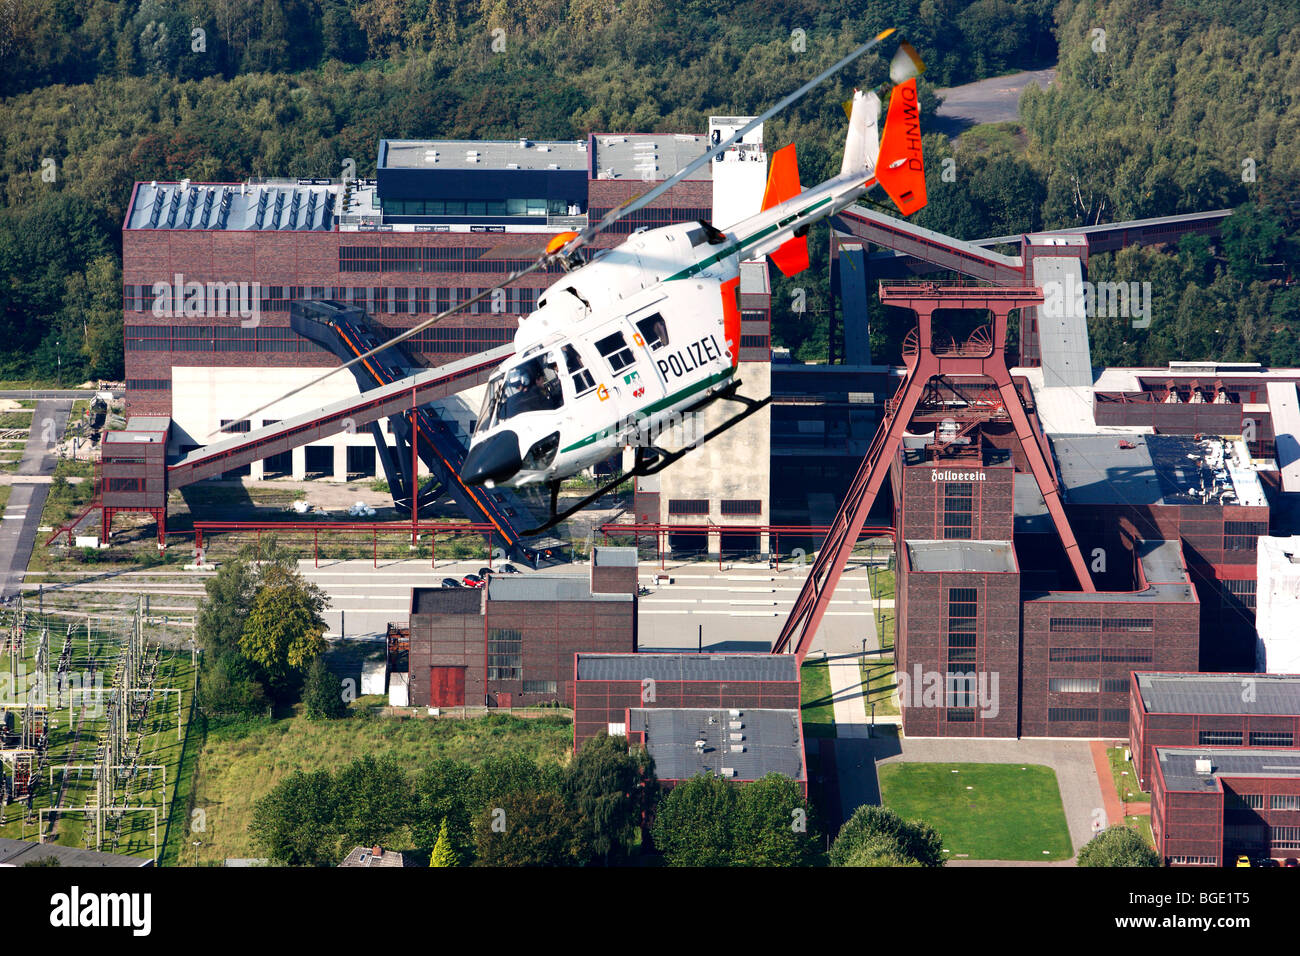 police helicopter Type BK 117 of the Police NRW at an operation flight. Germany, Europe Stock Photo